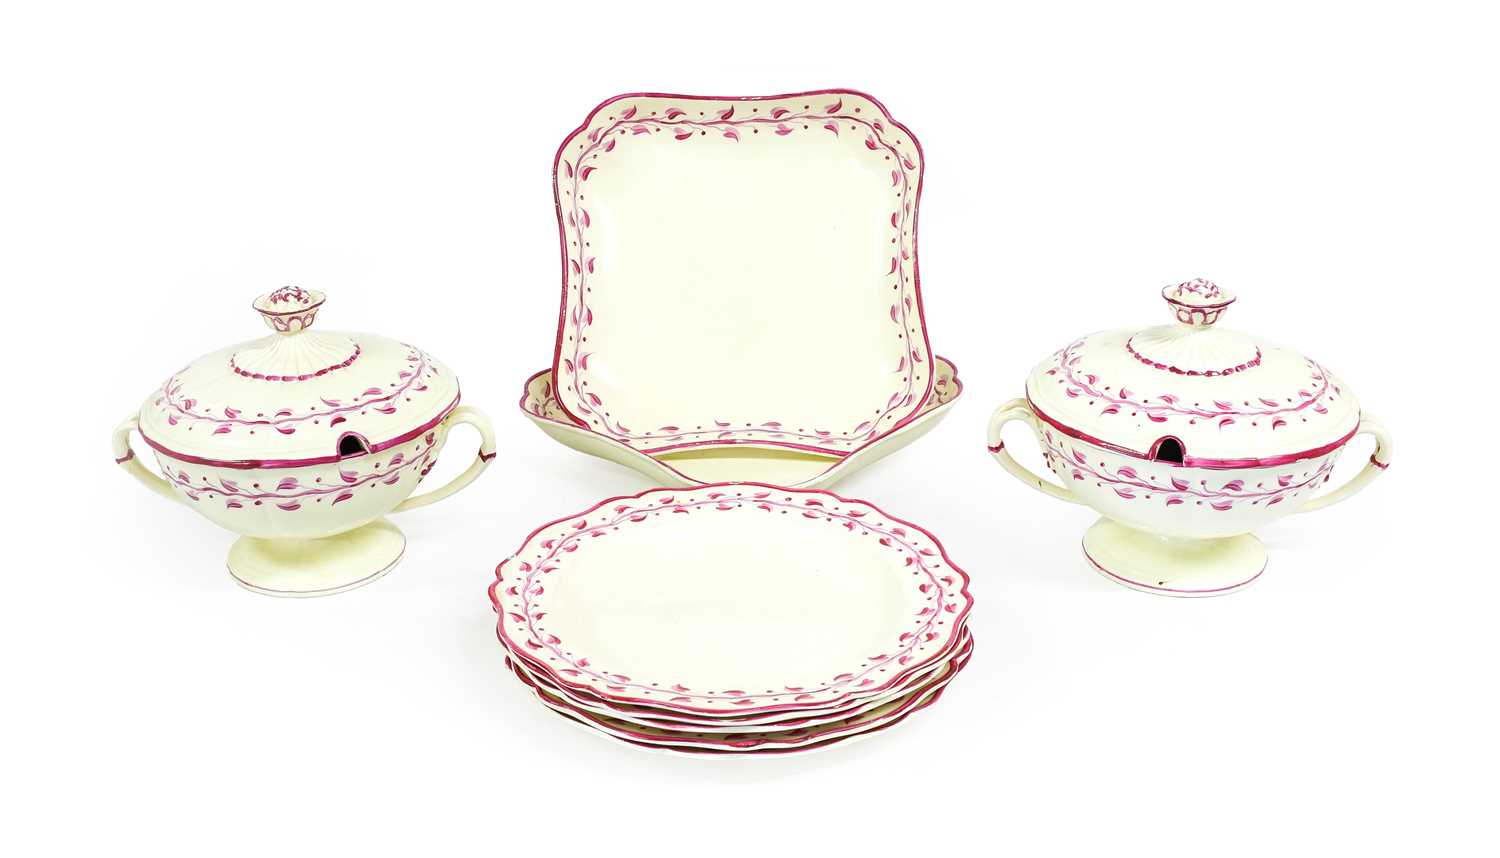 A Wedgwood Creamware Part Dessert Service, circa 1800, with puce rims and borders of trailing